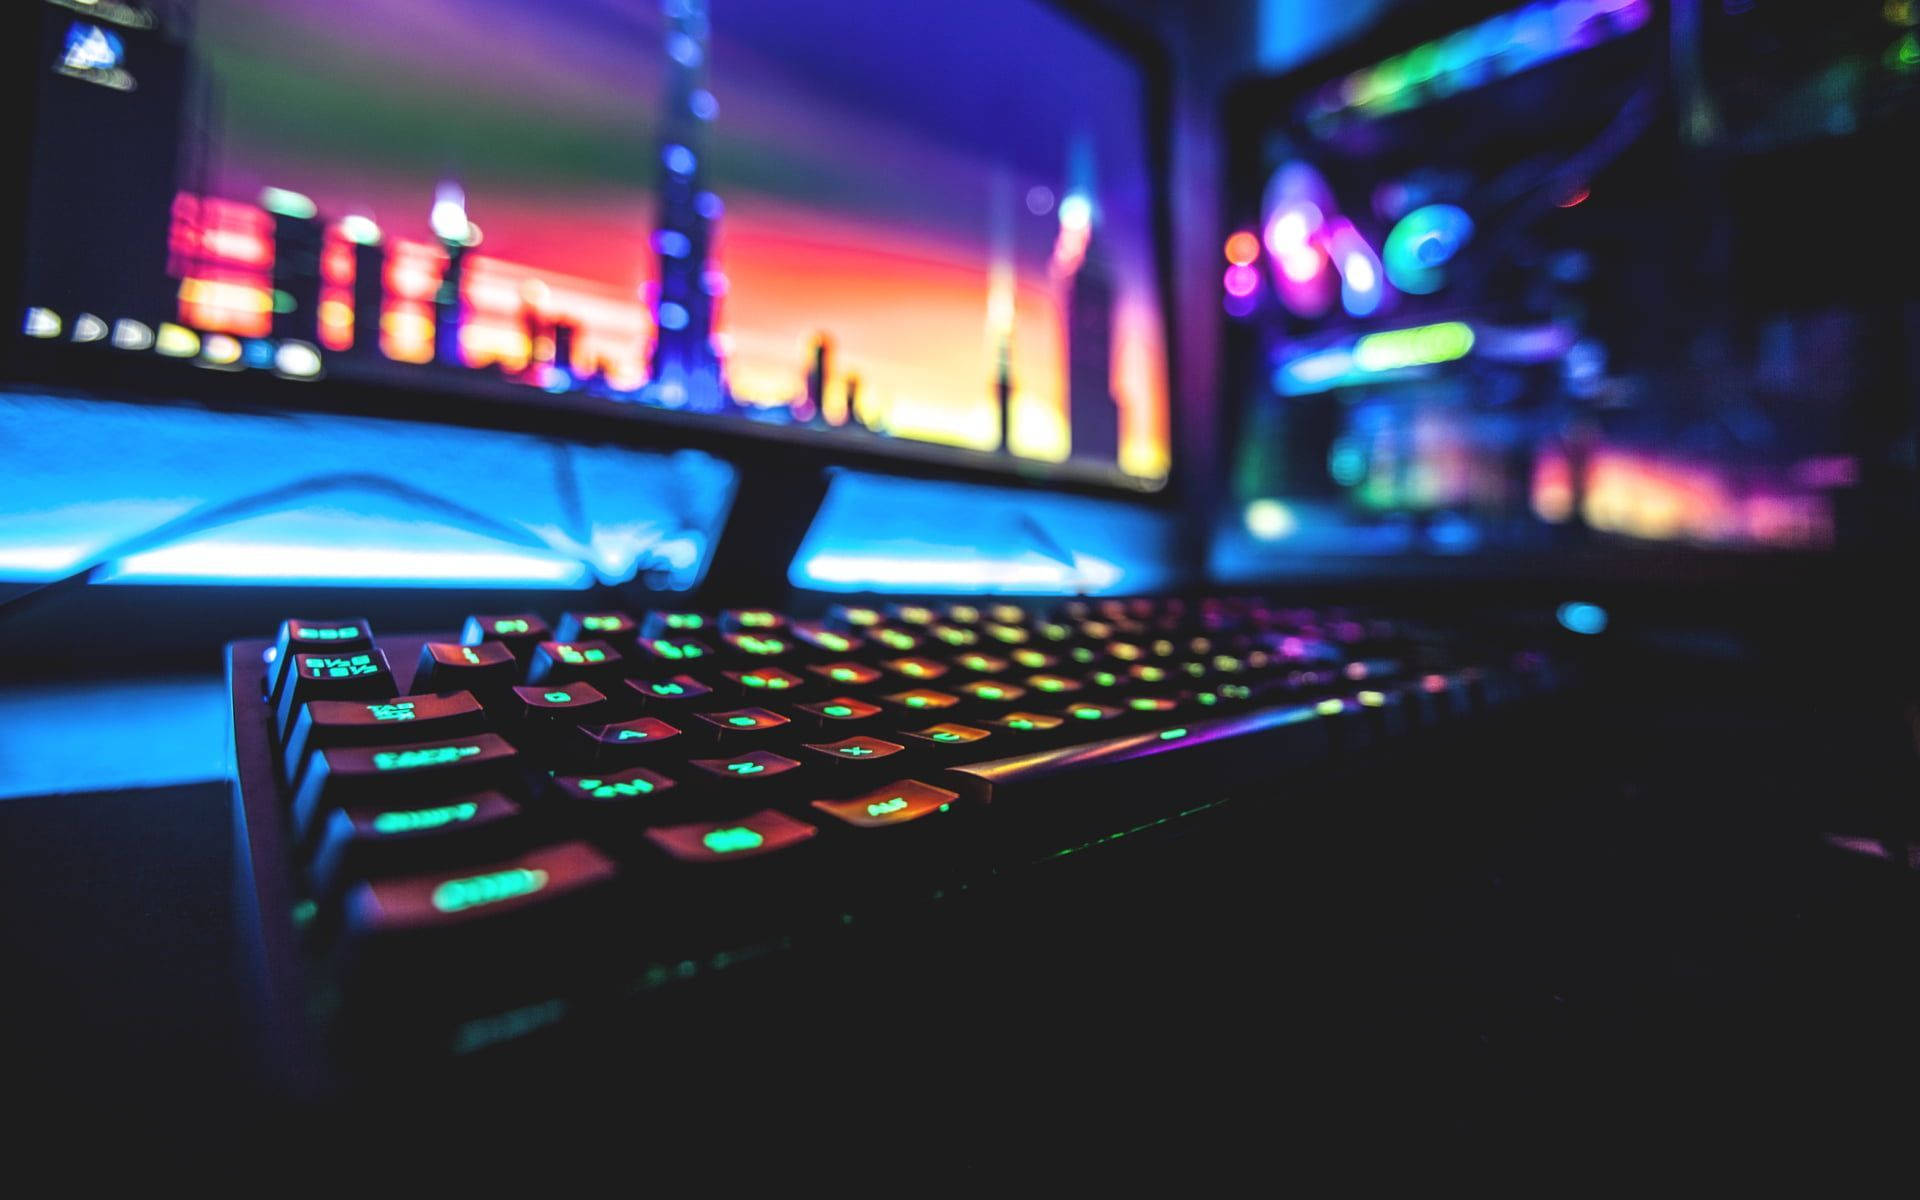 Aesthetic Neon Light Computer Keyboard Picture